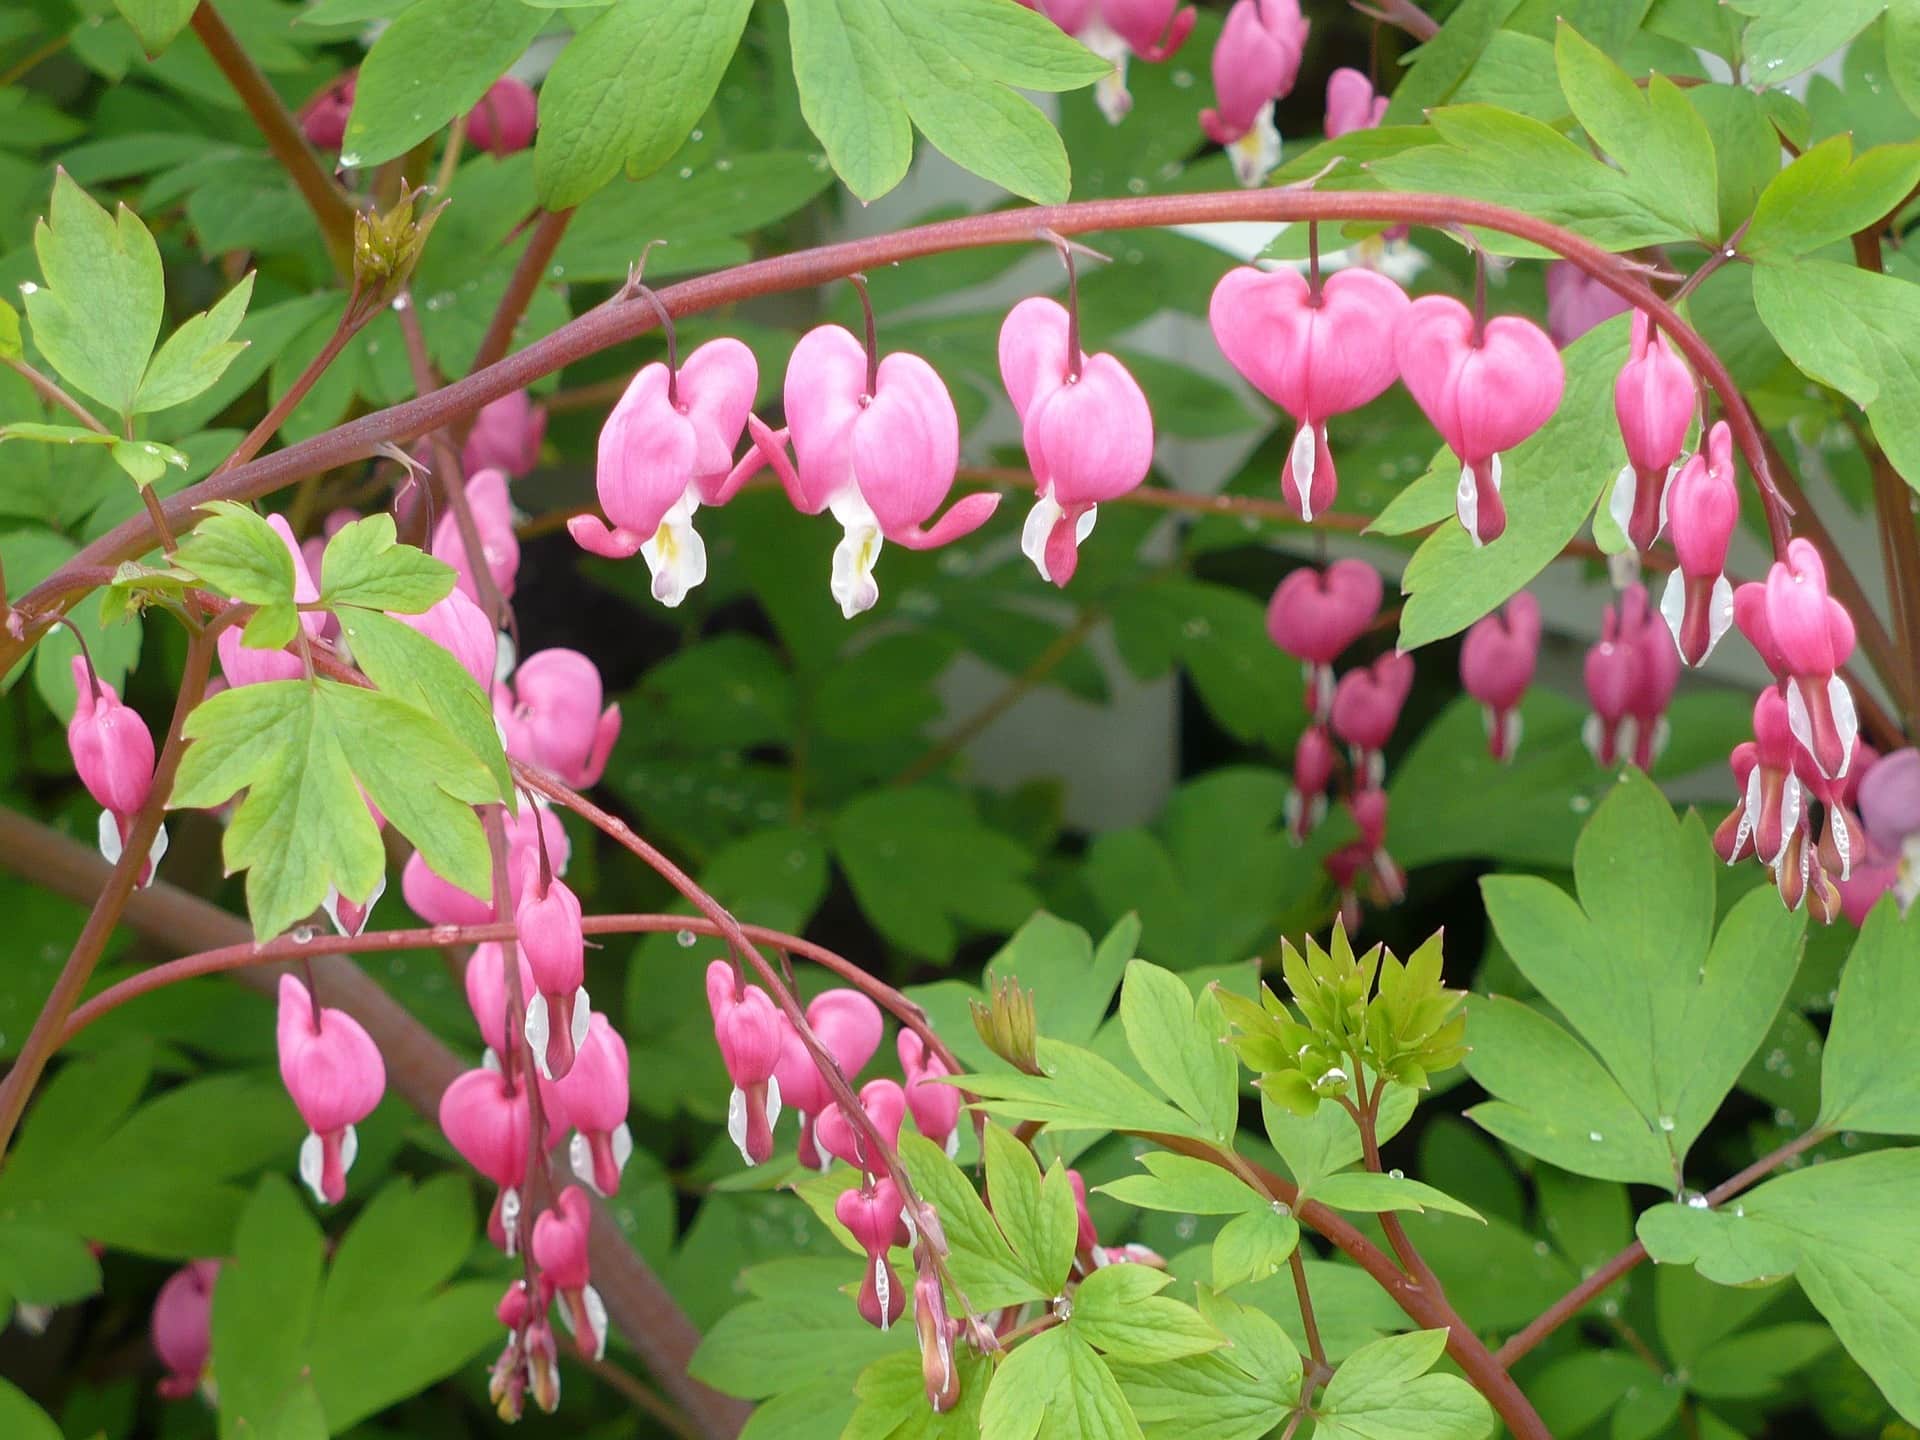 bleeding heart pkant. pink heart-shaped flowers hang in a row off a brownish stem. From the center of each flower is a longer white petal.